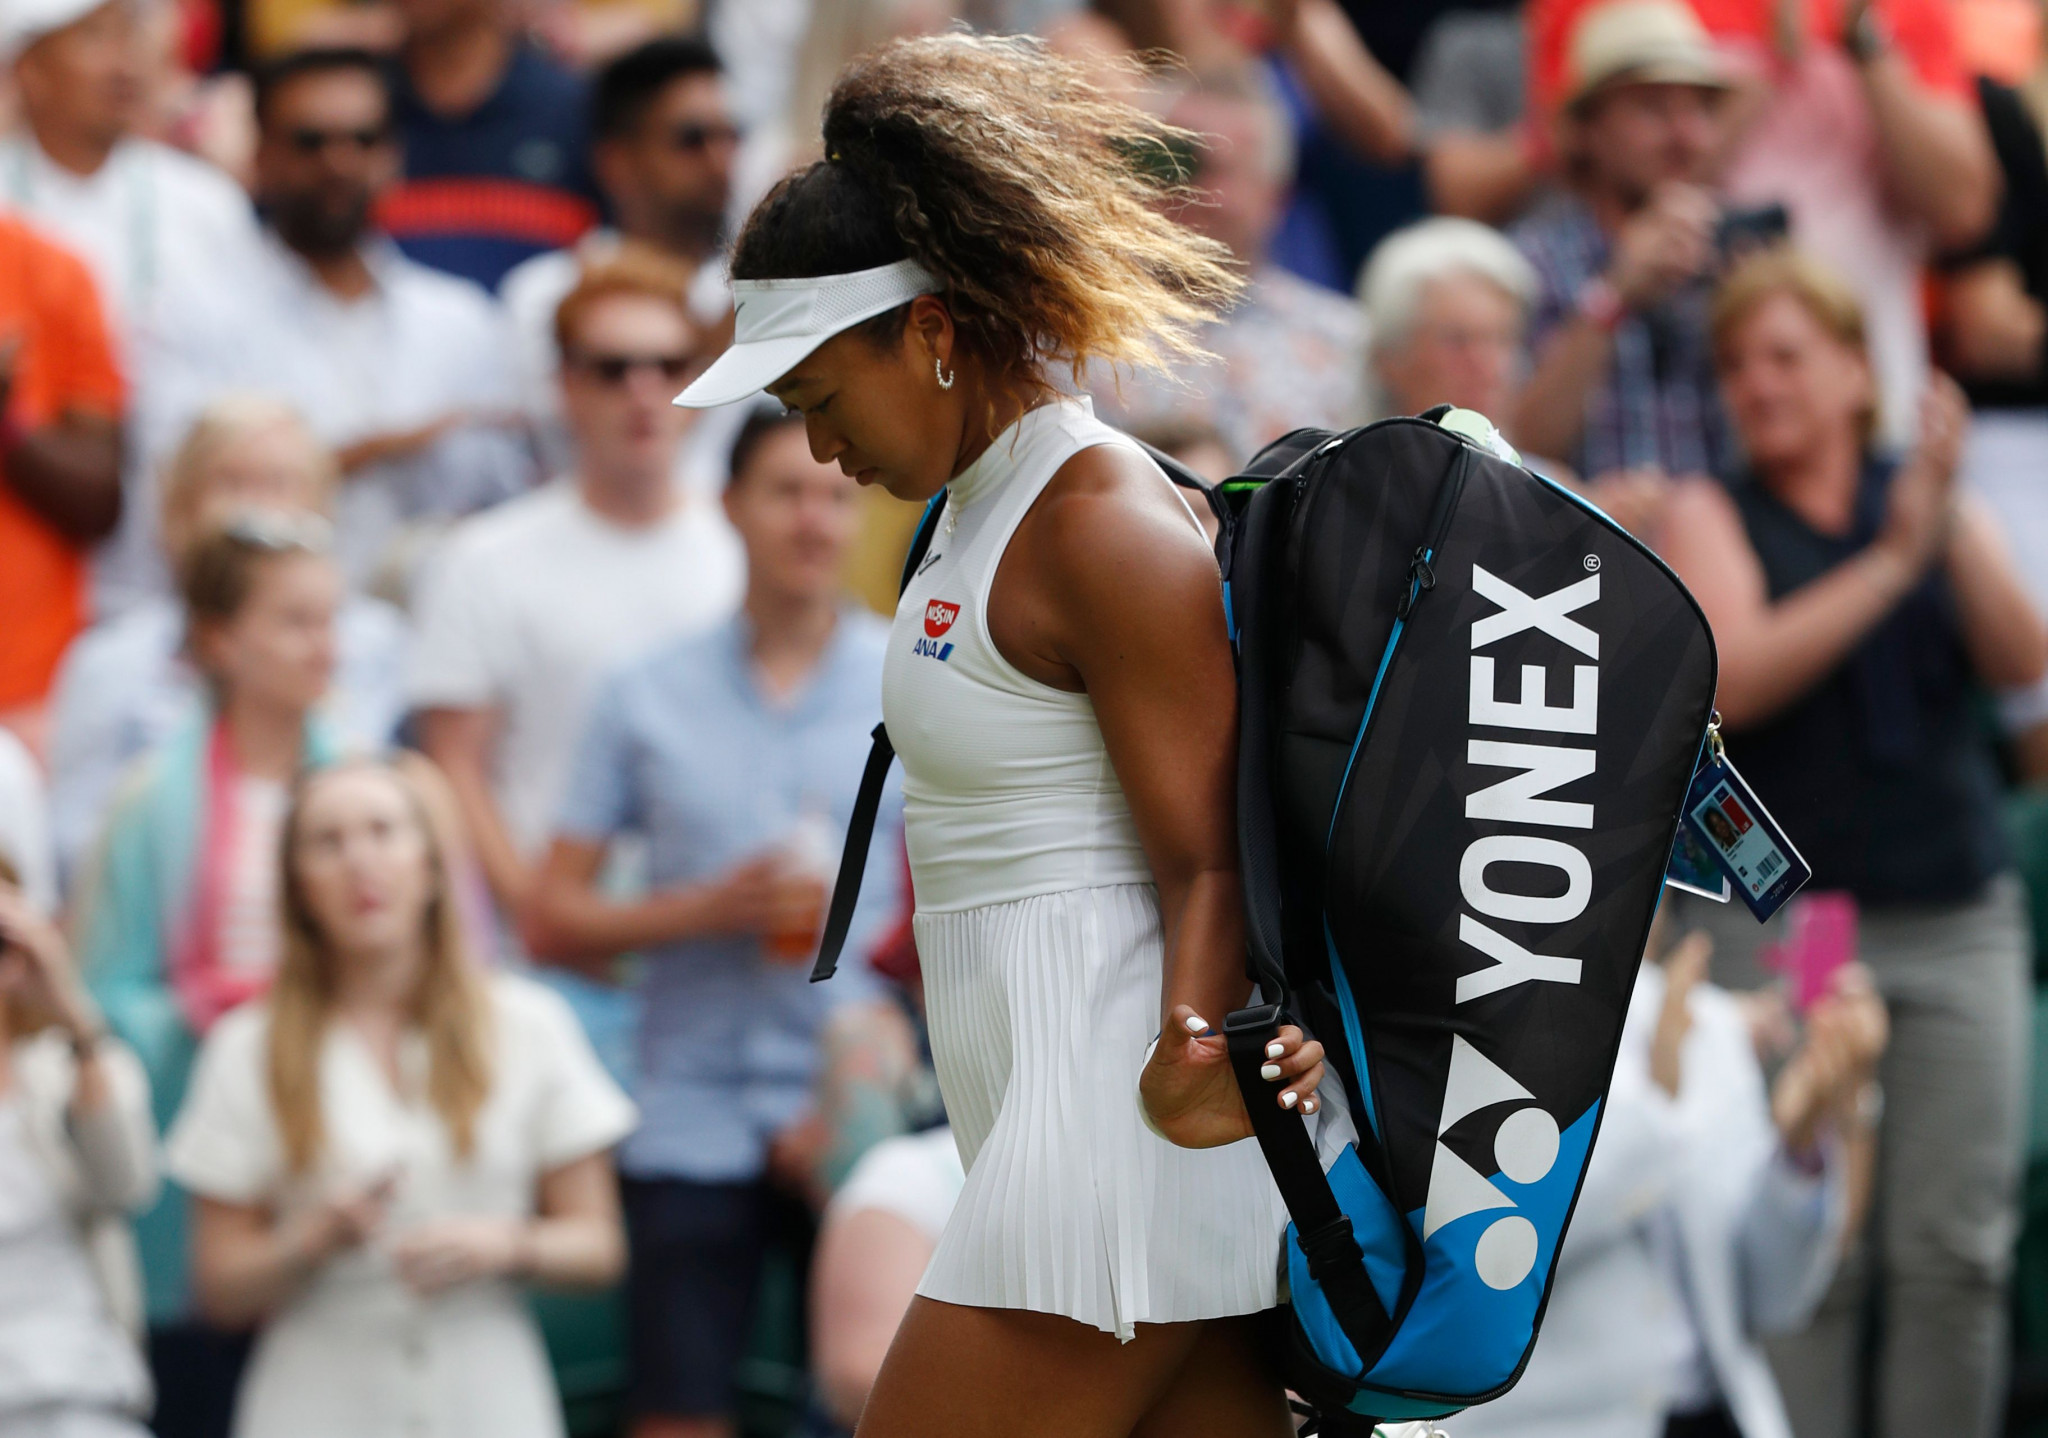 Japan's Naomi Osaka, chasing a third Grand Slam victory in less than a year, made a surprise first round exit at Wimbledon ©Getty Images